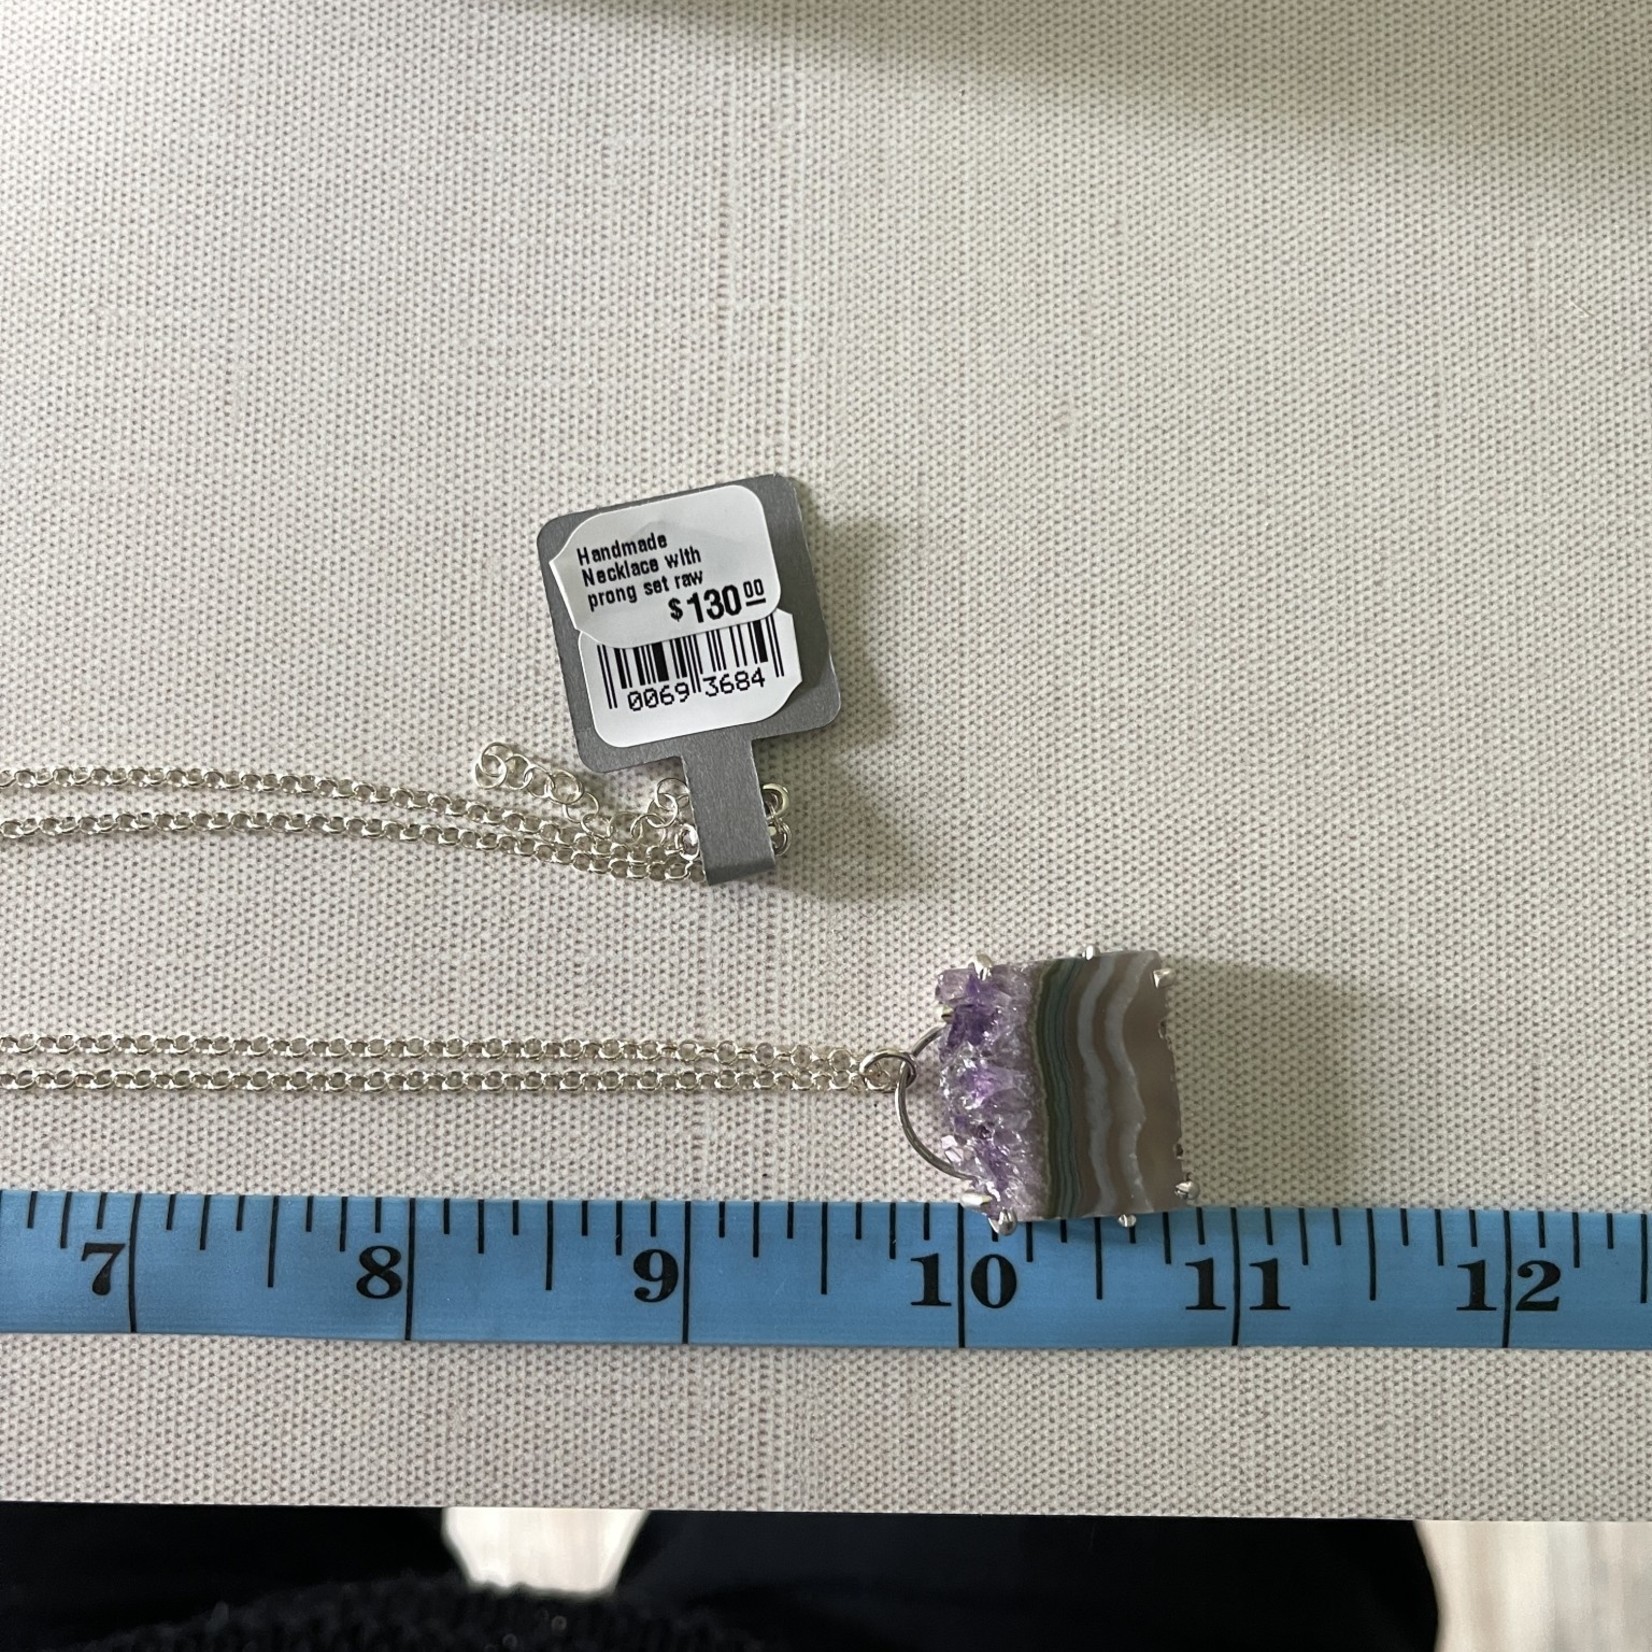 Handmade Necklace with prong set raw amethyst slice